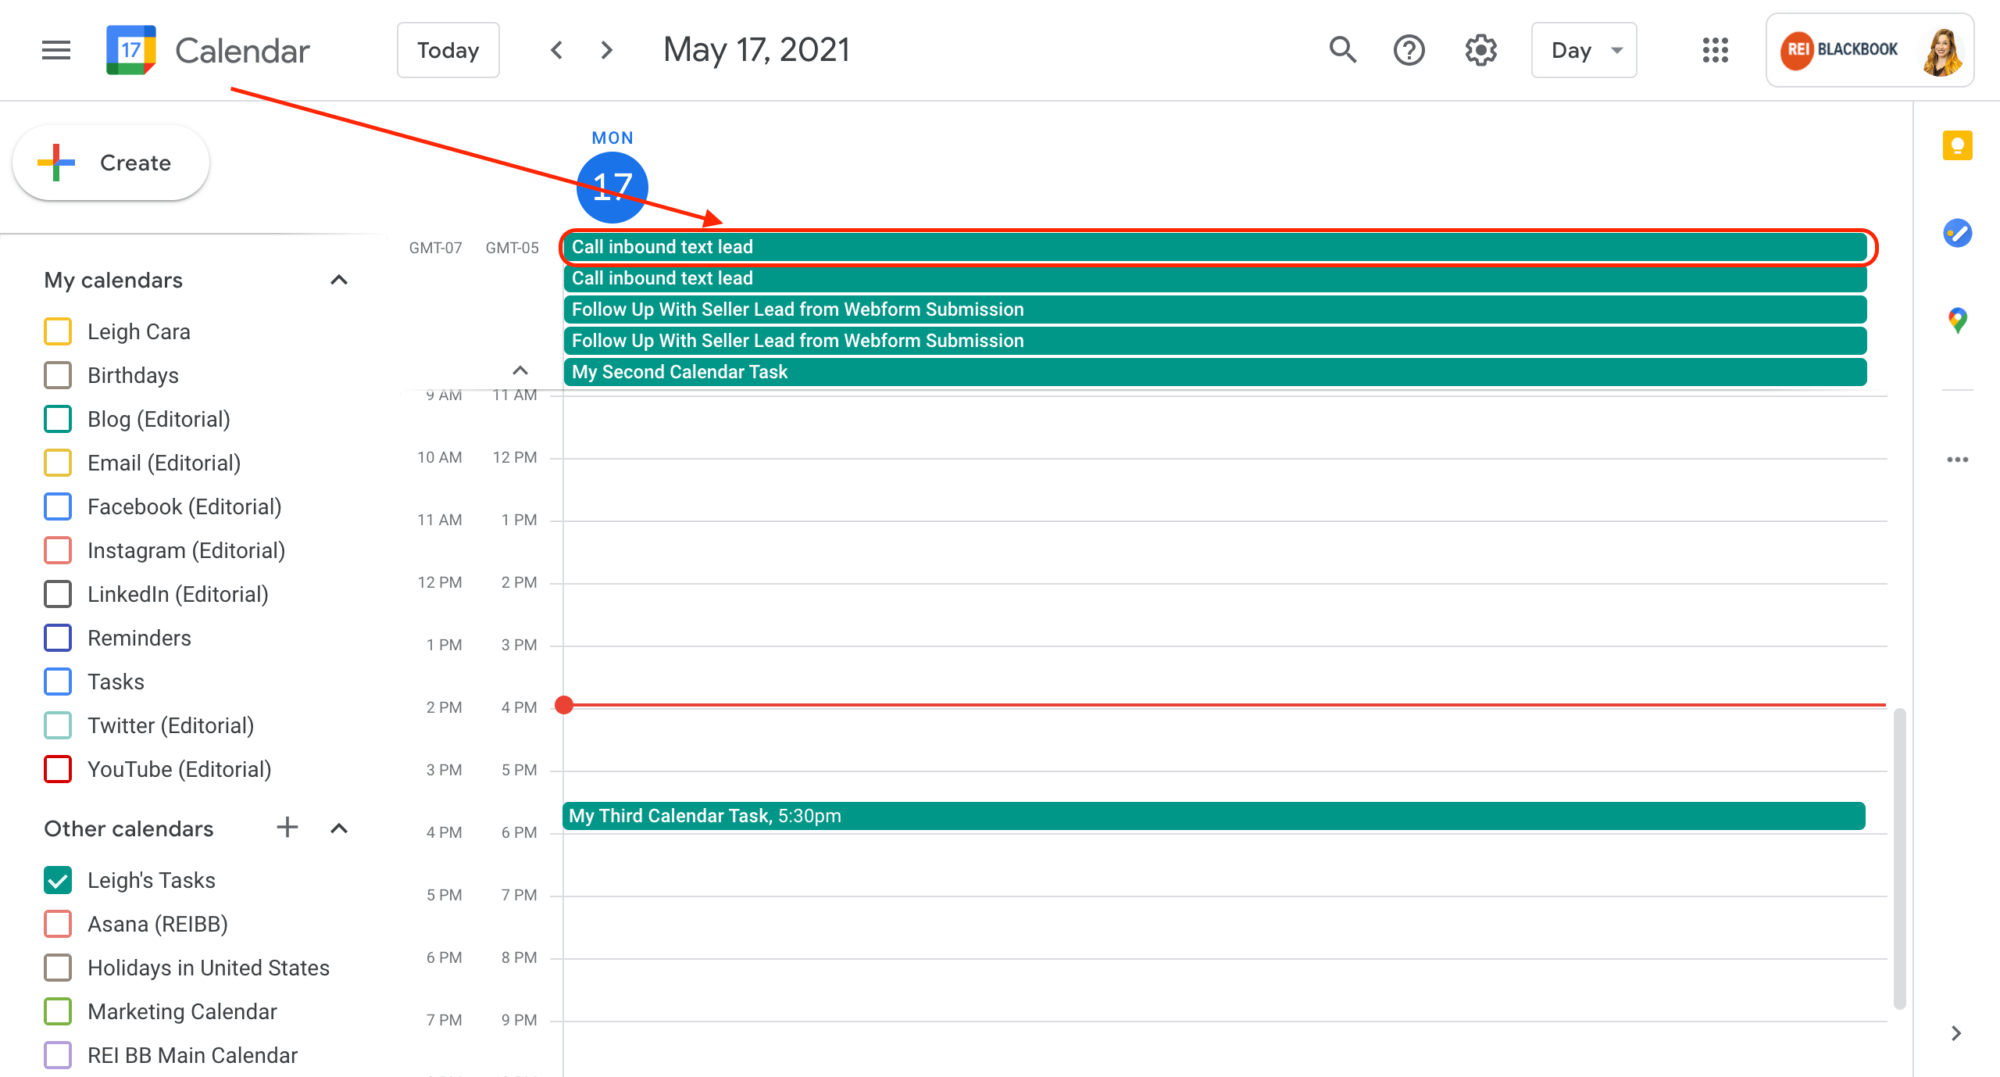 When using calendar sync, if there is no specified due time, it will display as an all day event